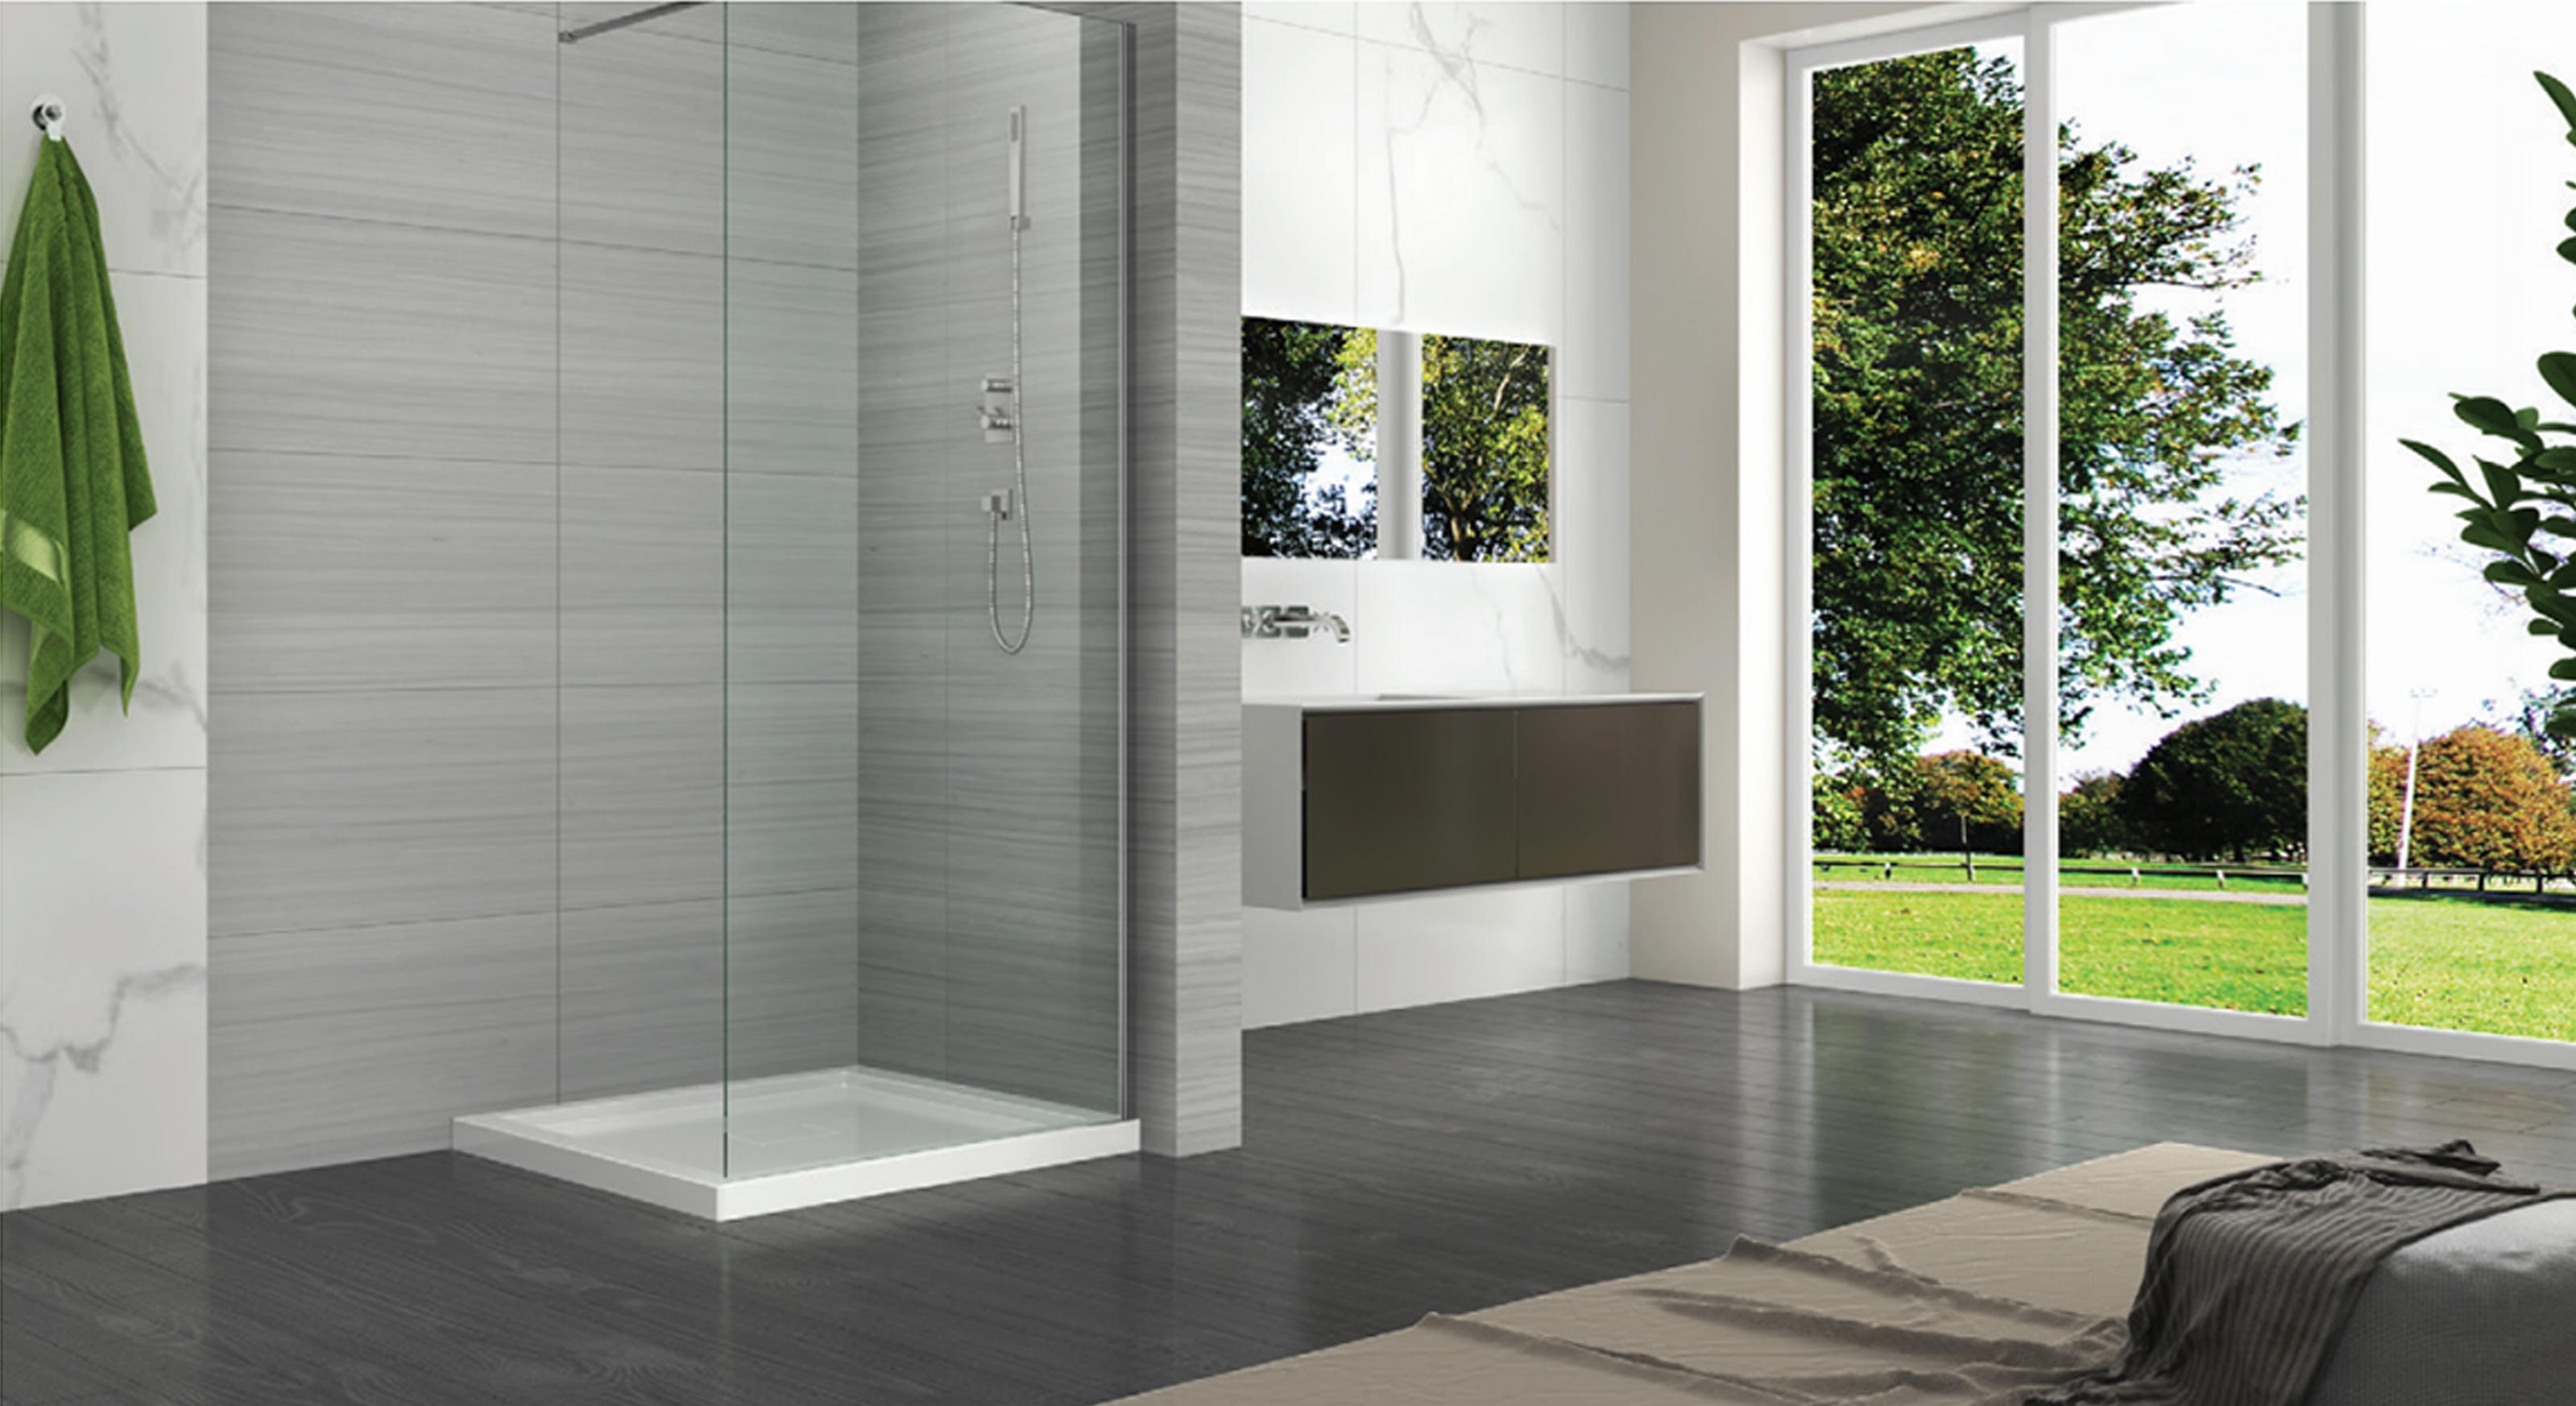 Wet Room Screen Panel with Arm - 8mm Glass – Multiple Sizes